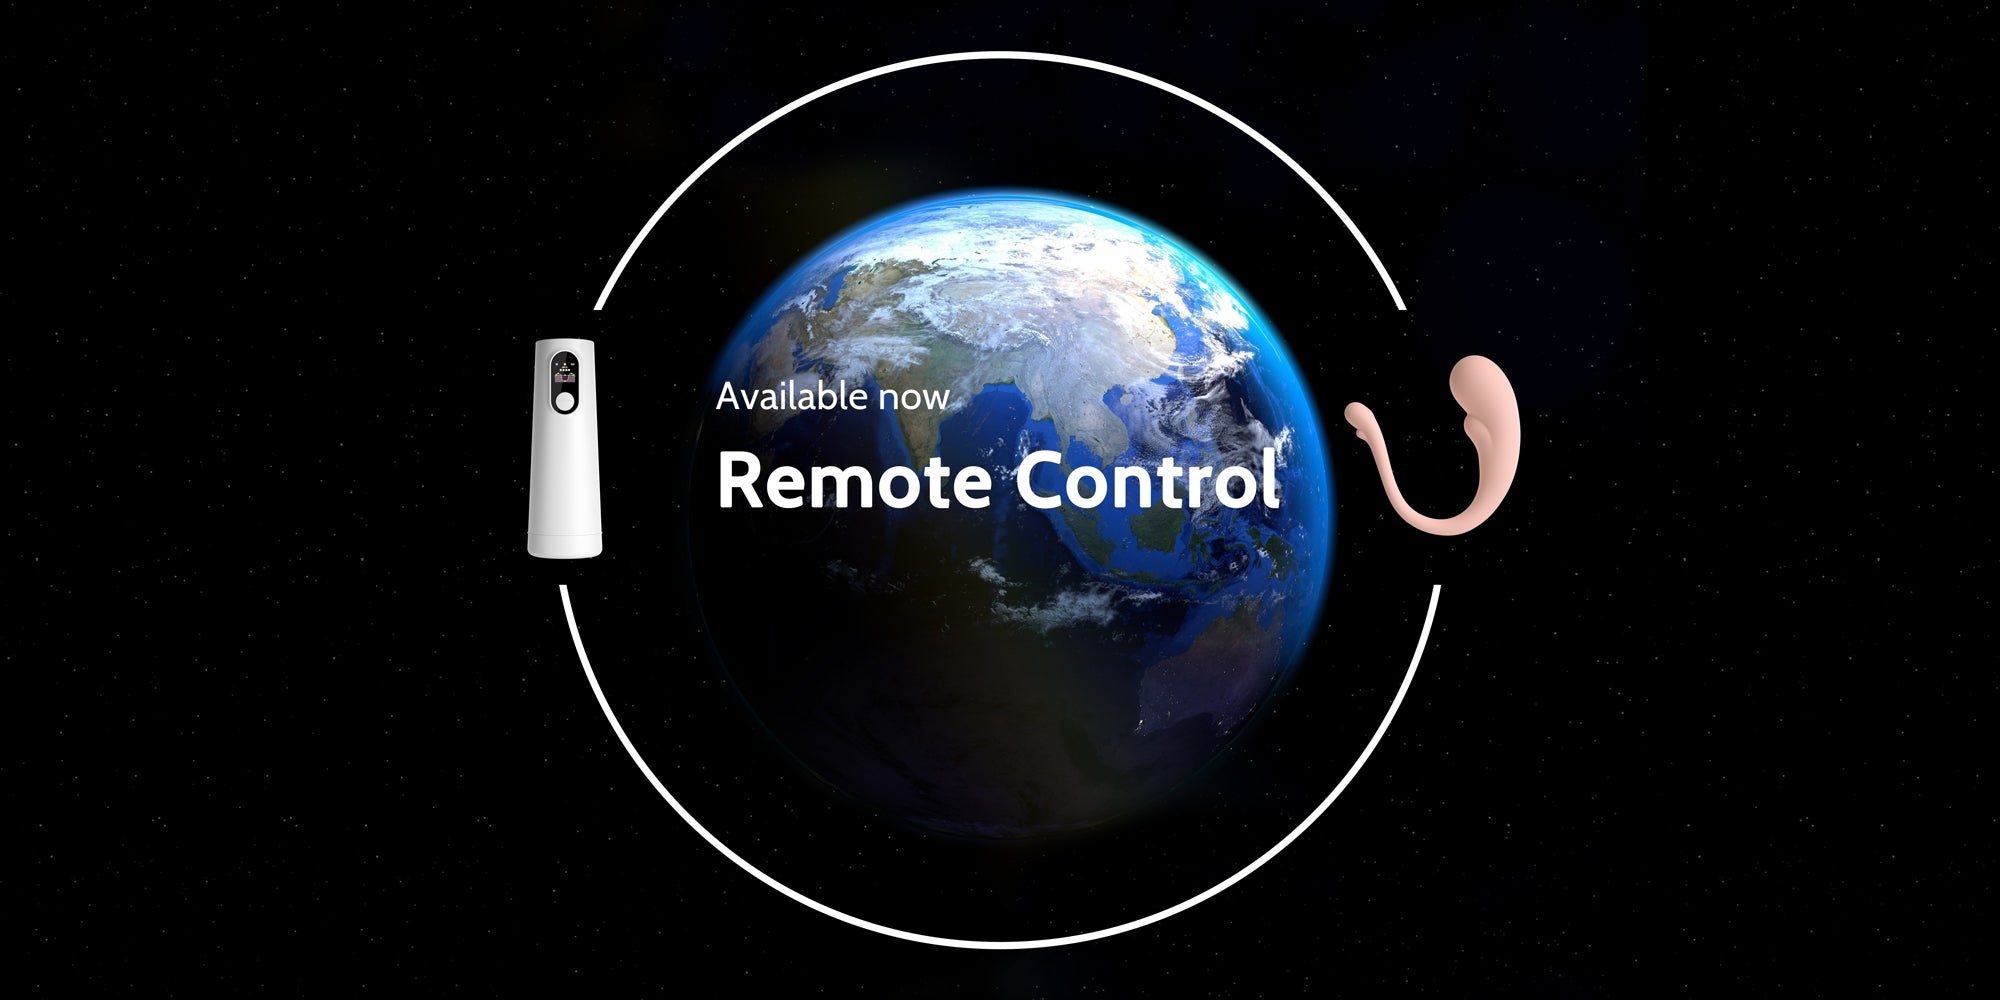 Remote Interaction available now!